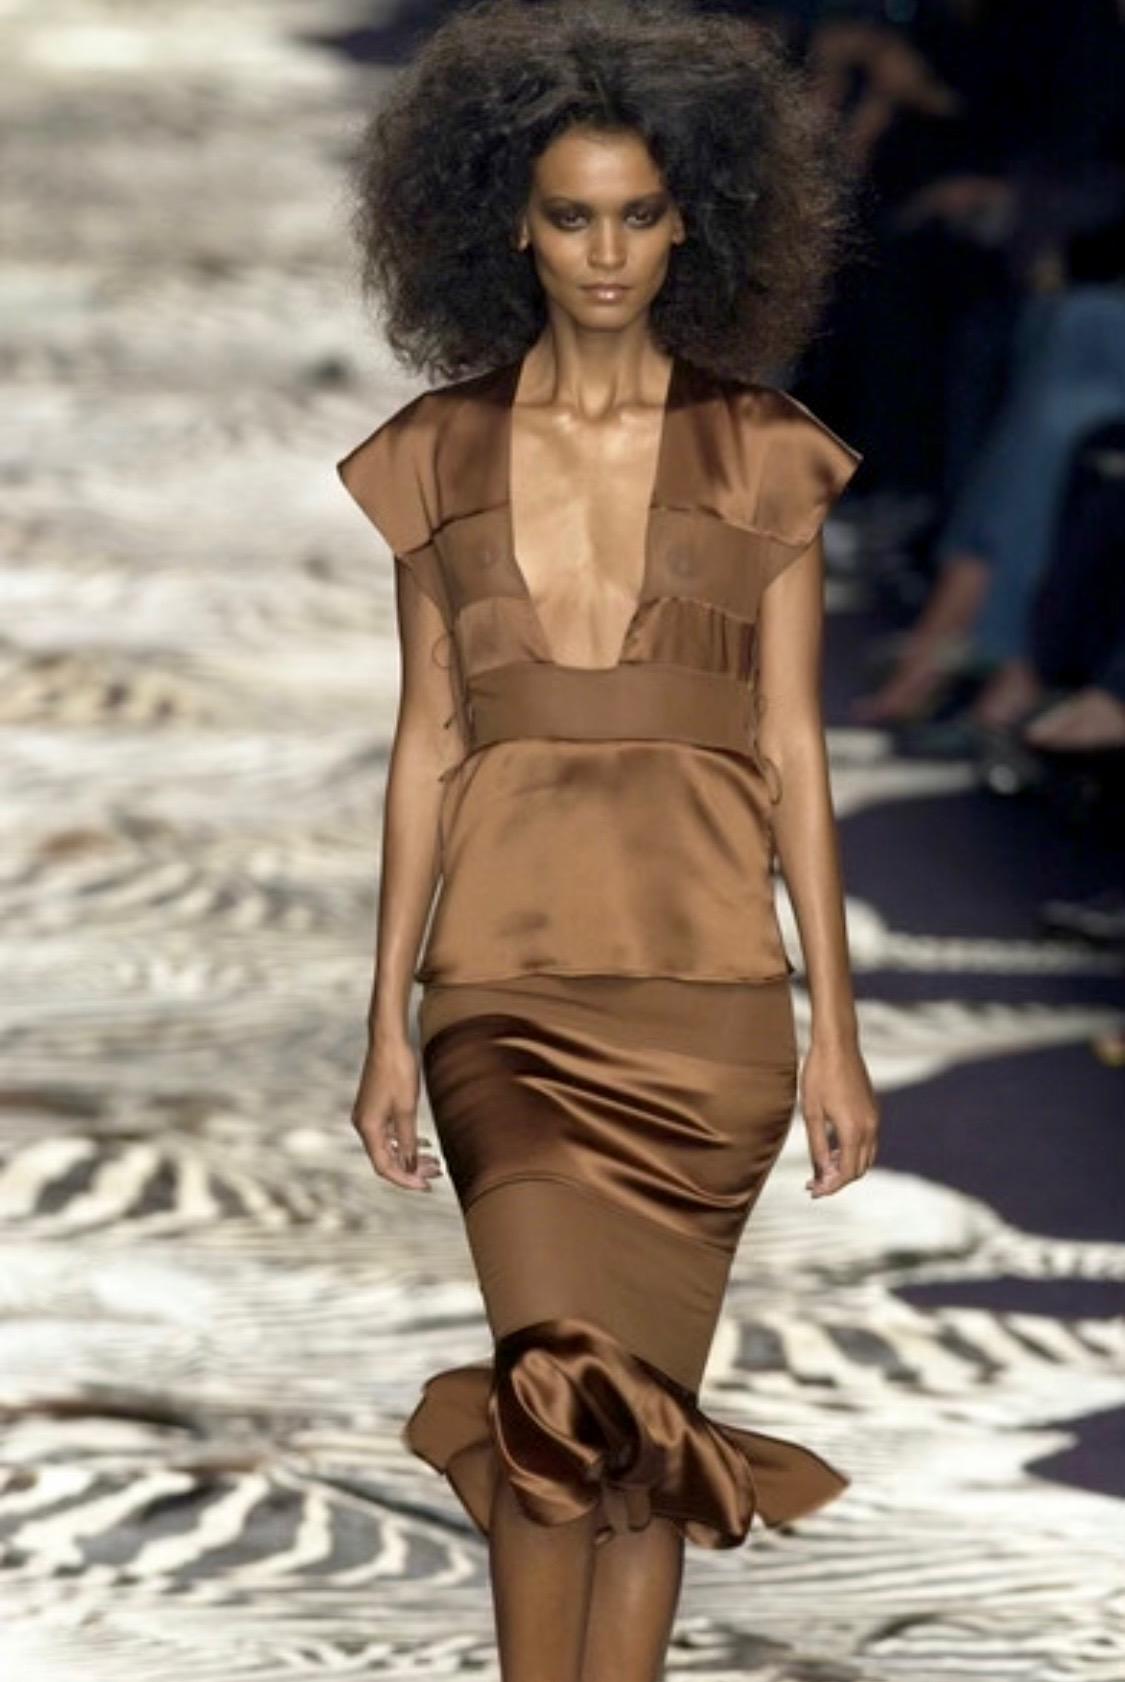 Presenting a daring sheer silk satin panel top designed by Tom Ford for Yves Saint Laurent Rive Gauche's Spring/Summer 2004 collection. This top appeared in brown on Liya Kebede on look 11 of Ford's final spring collection with YSL. Ties at the